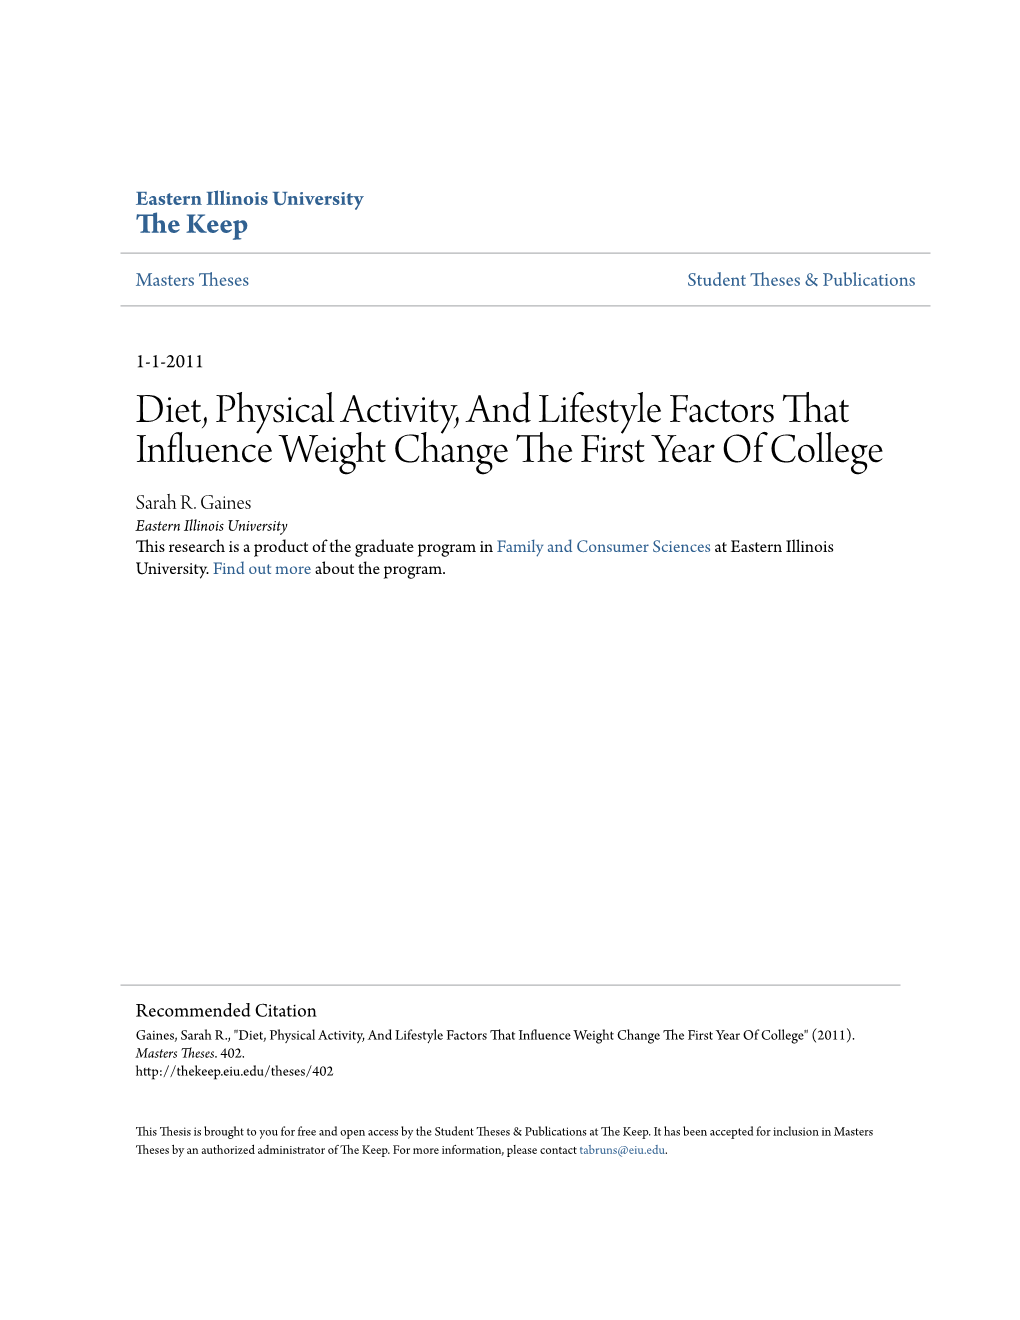 Diet, Physical Activity, and Lifestyle Factors That Influence Weight Change the Irsf T Year of College Sarah R